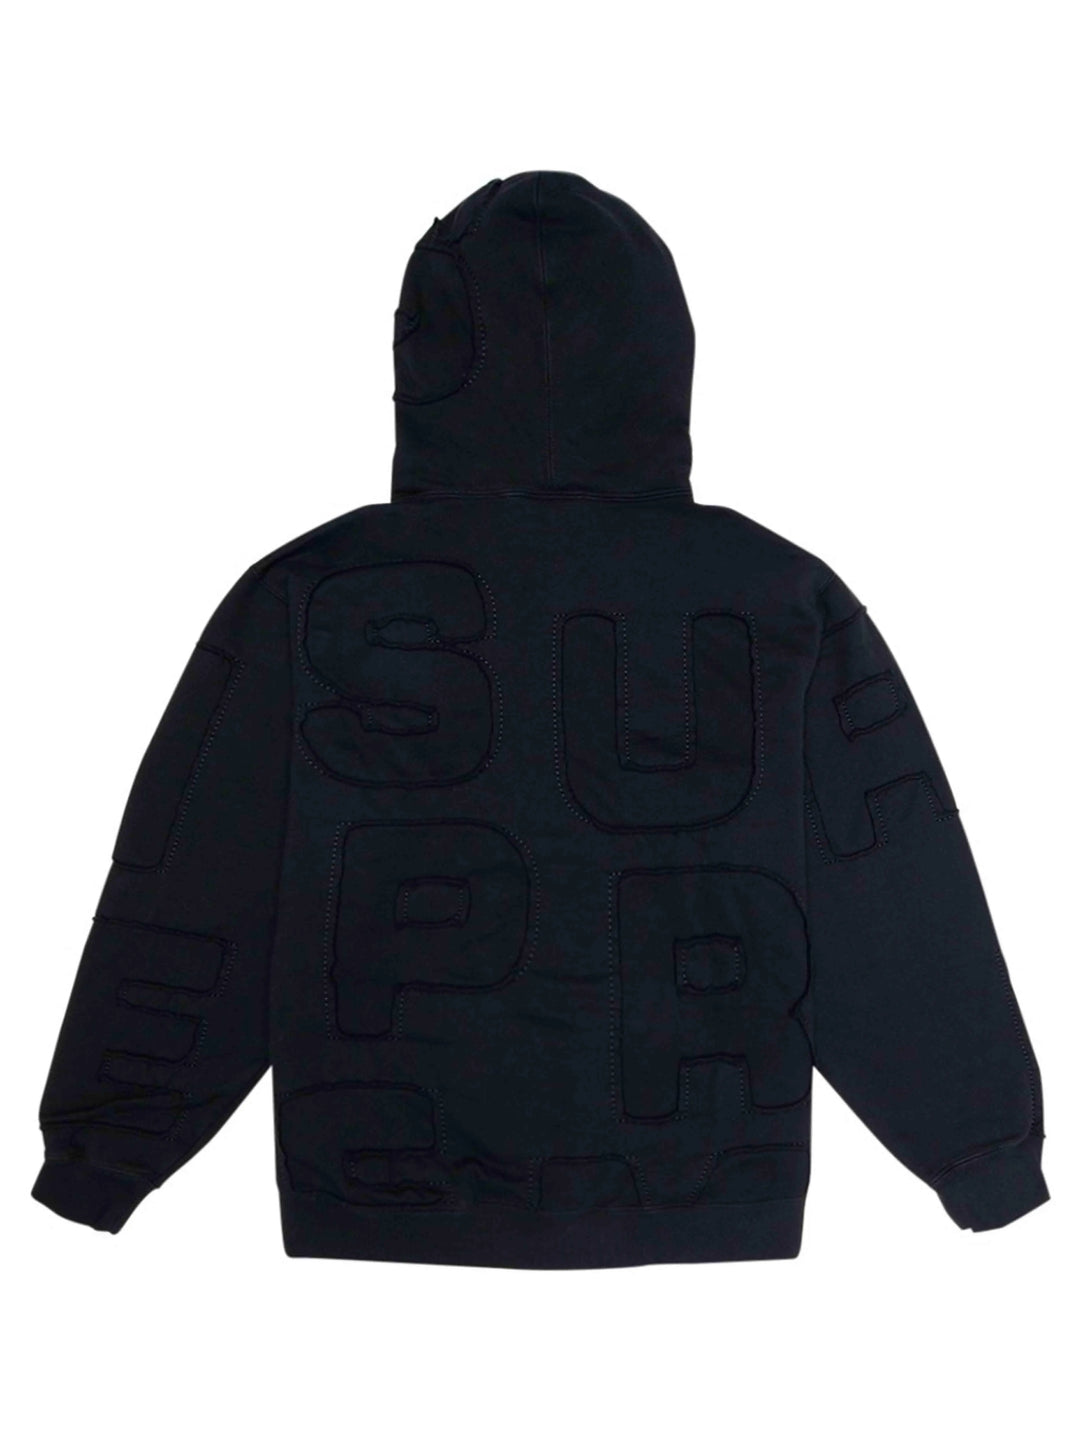 SUPREME CUTOUT LETTERS HOODIE BLACK [SS20] Prior